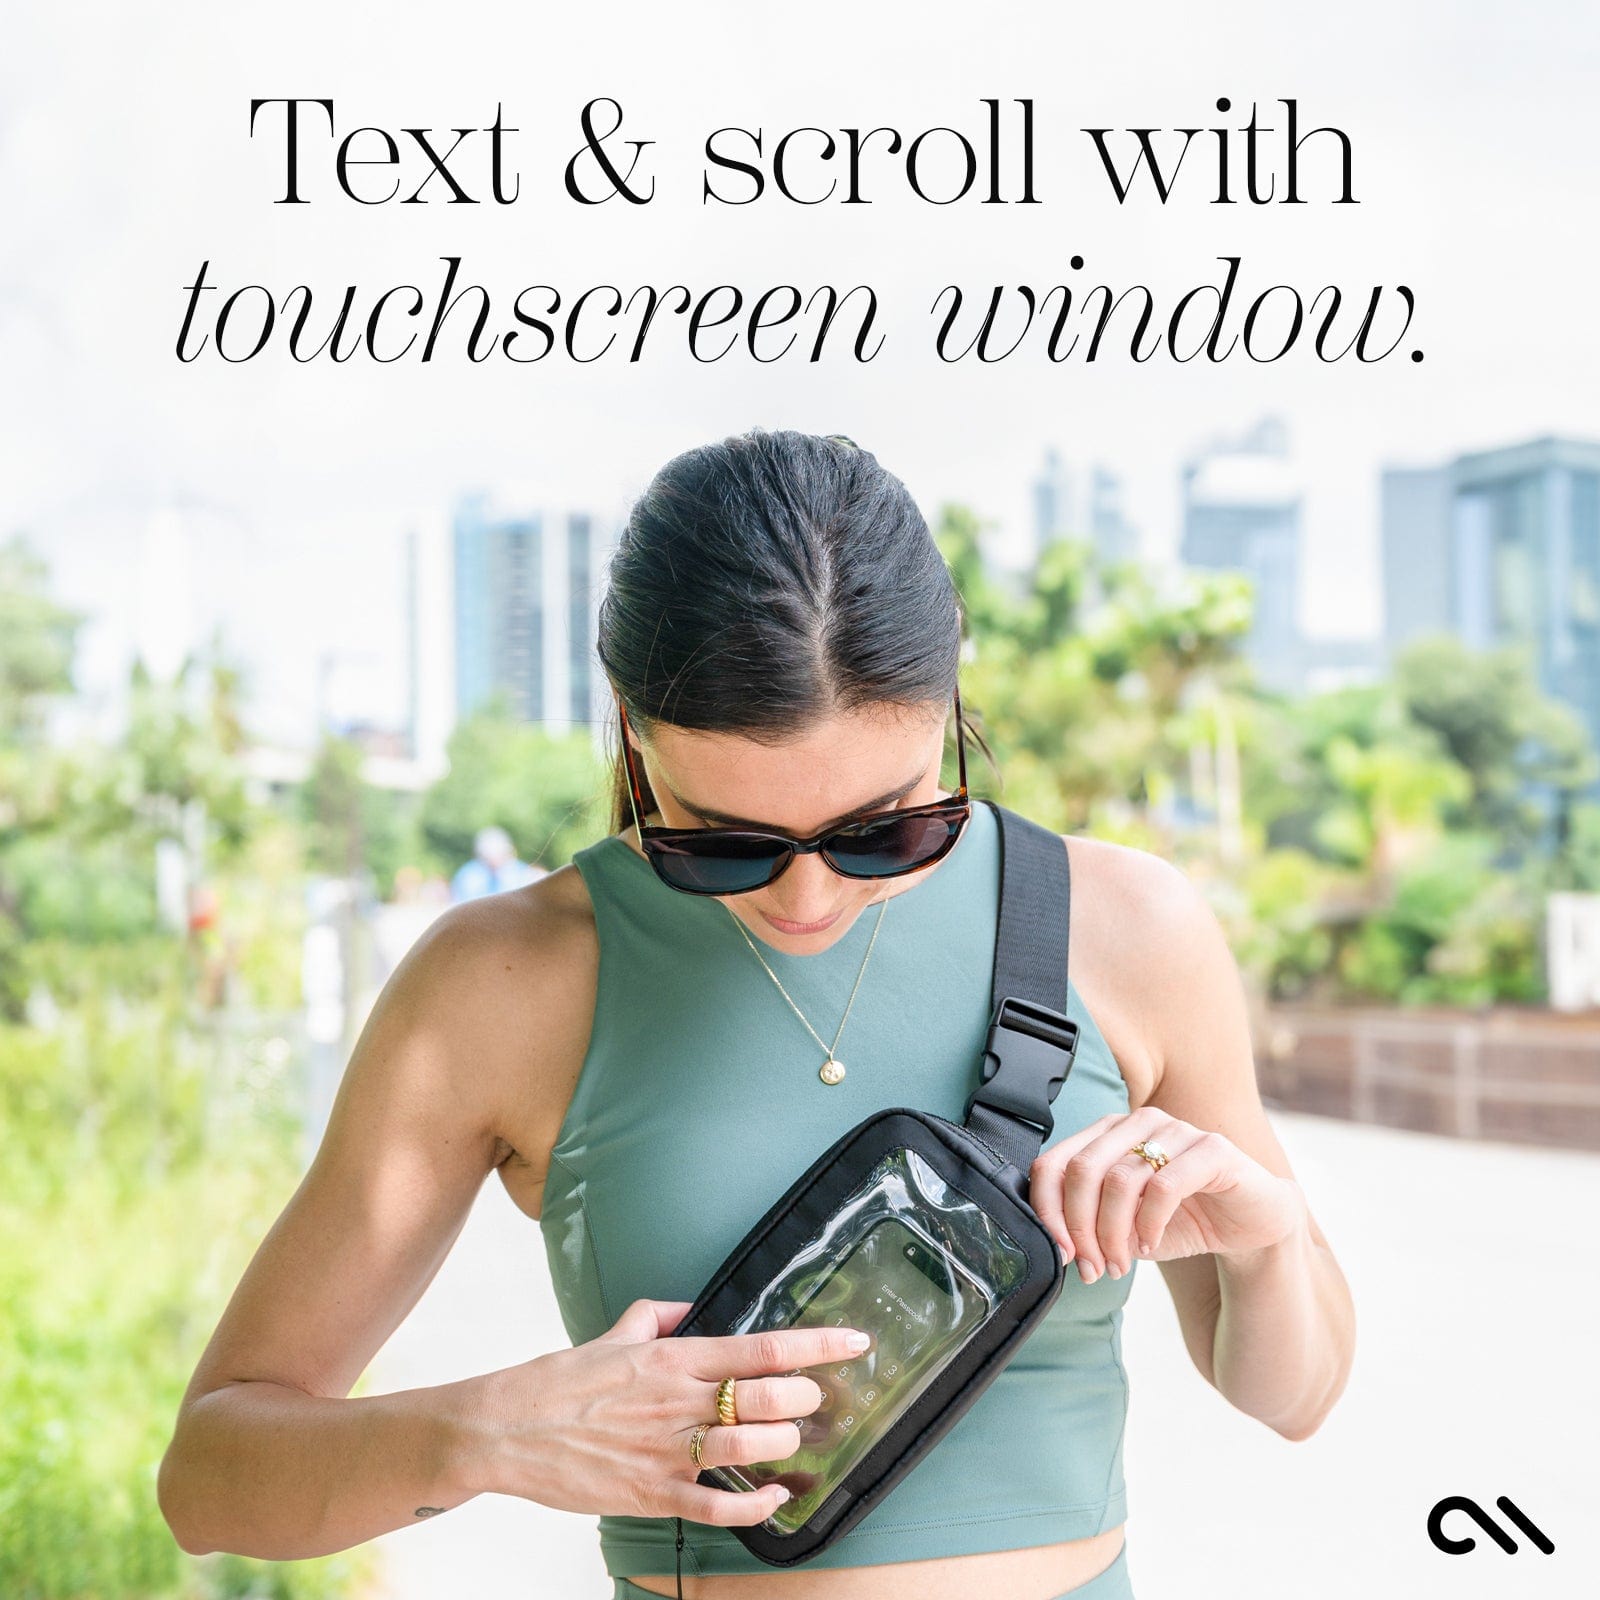 TEXT & SCROLL WITH TOUCHSCREEN WINDOW